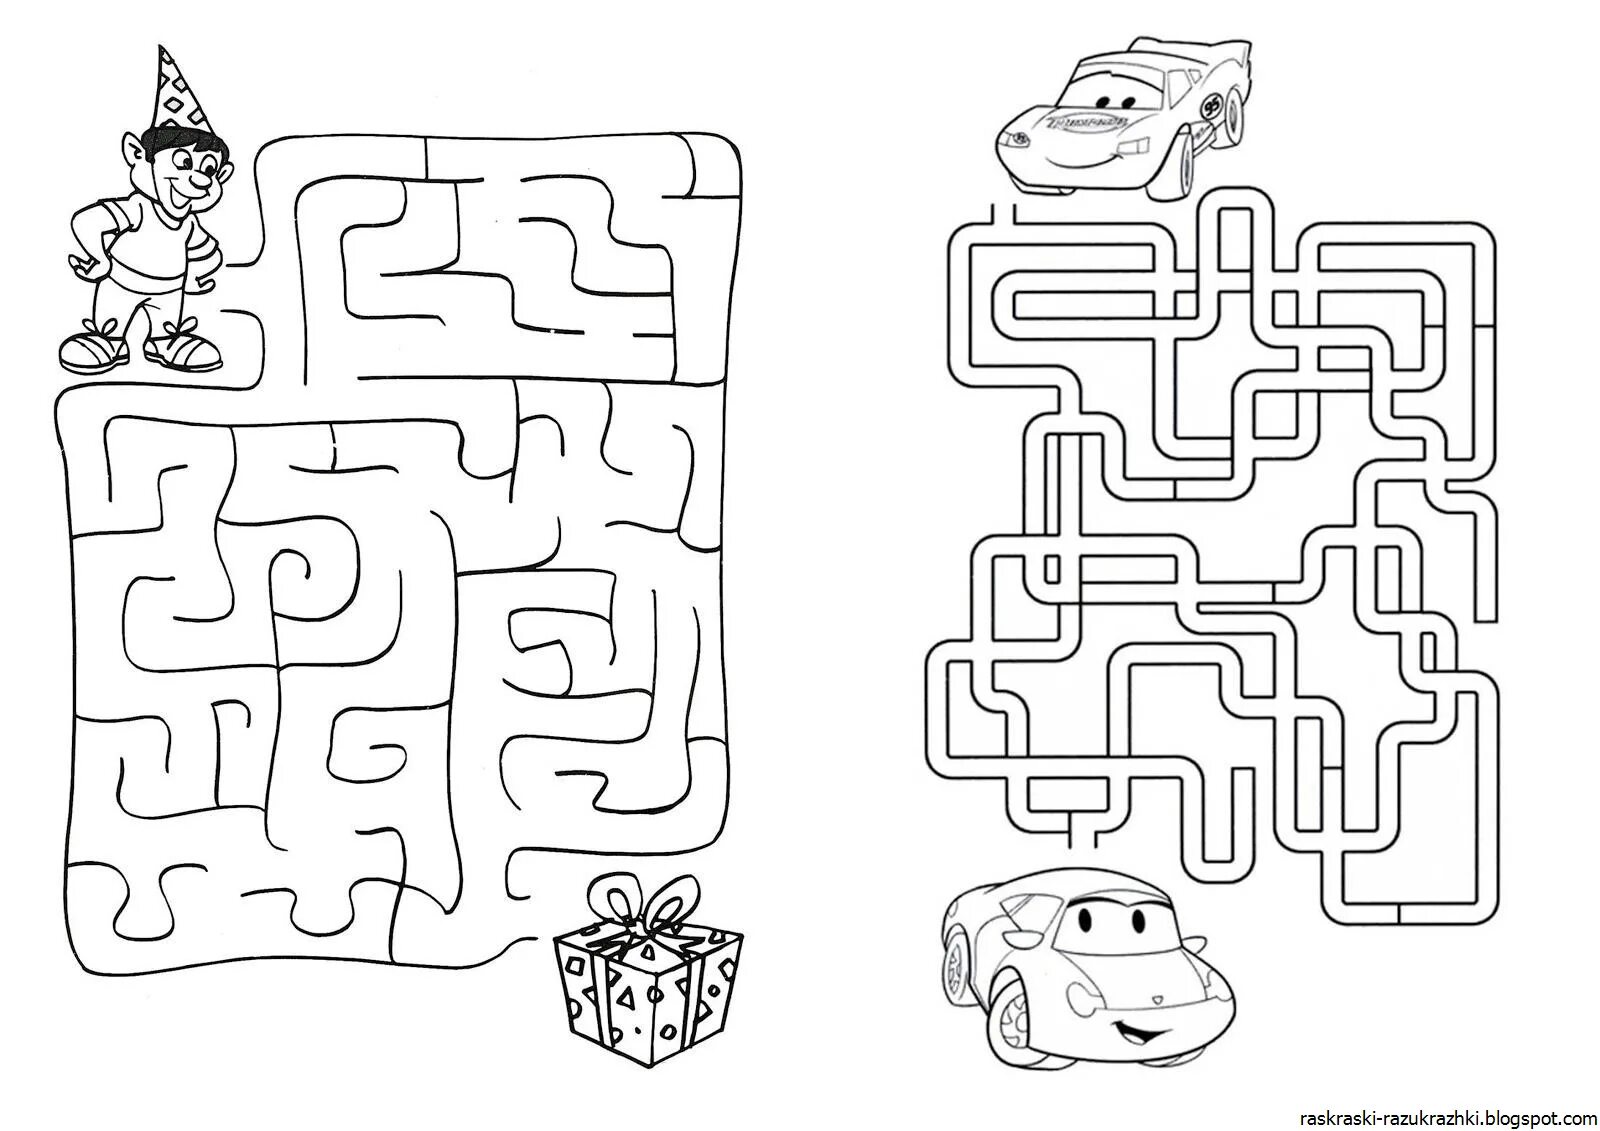 Labyrinth for 7 year olds #5